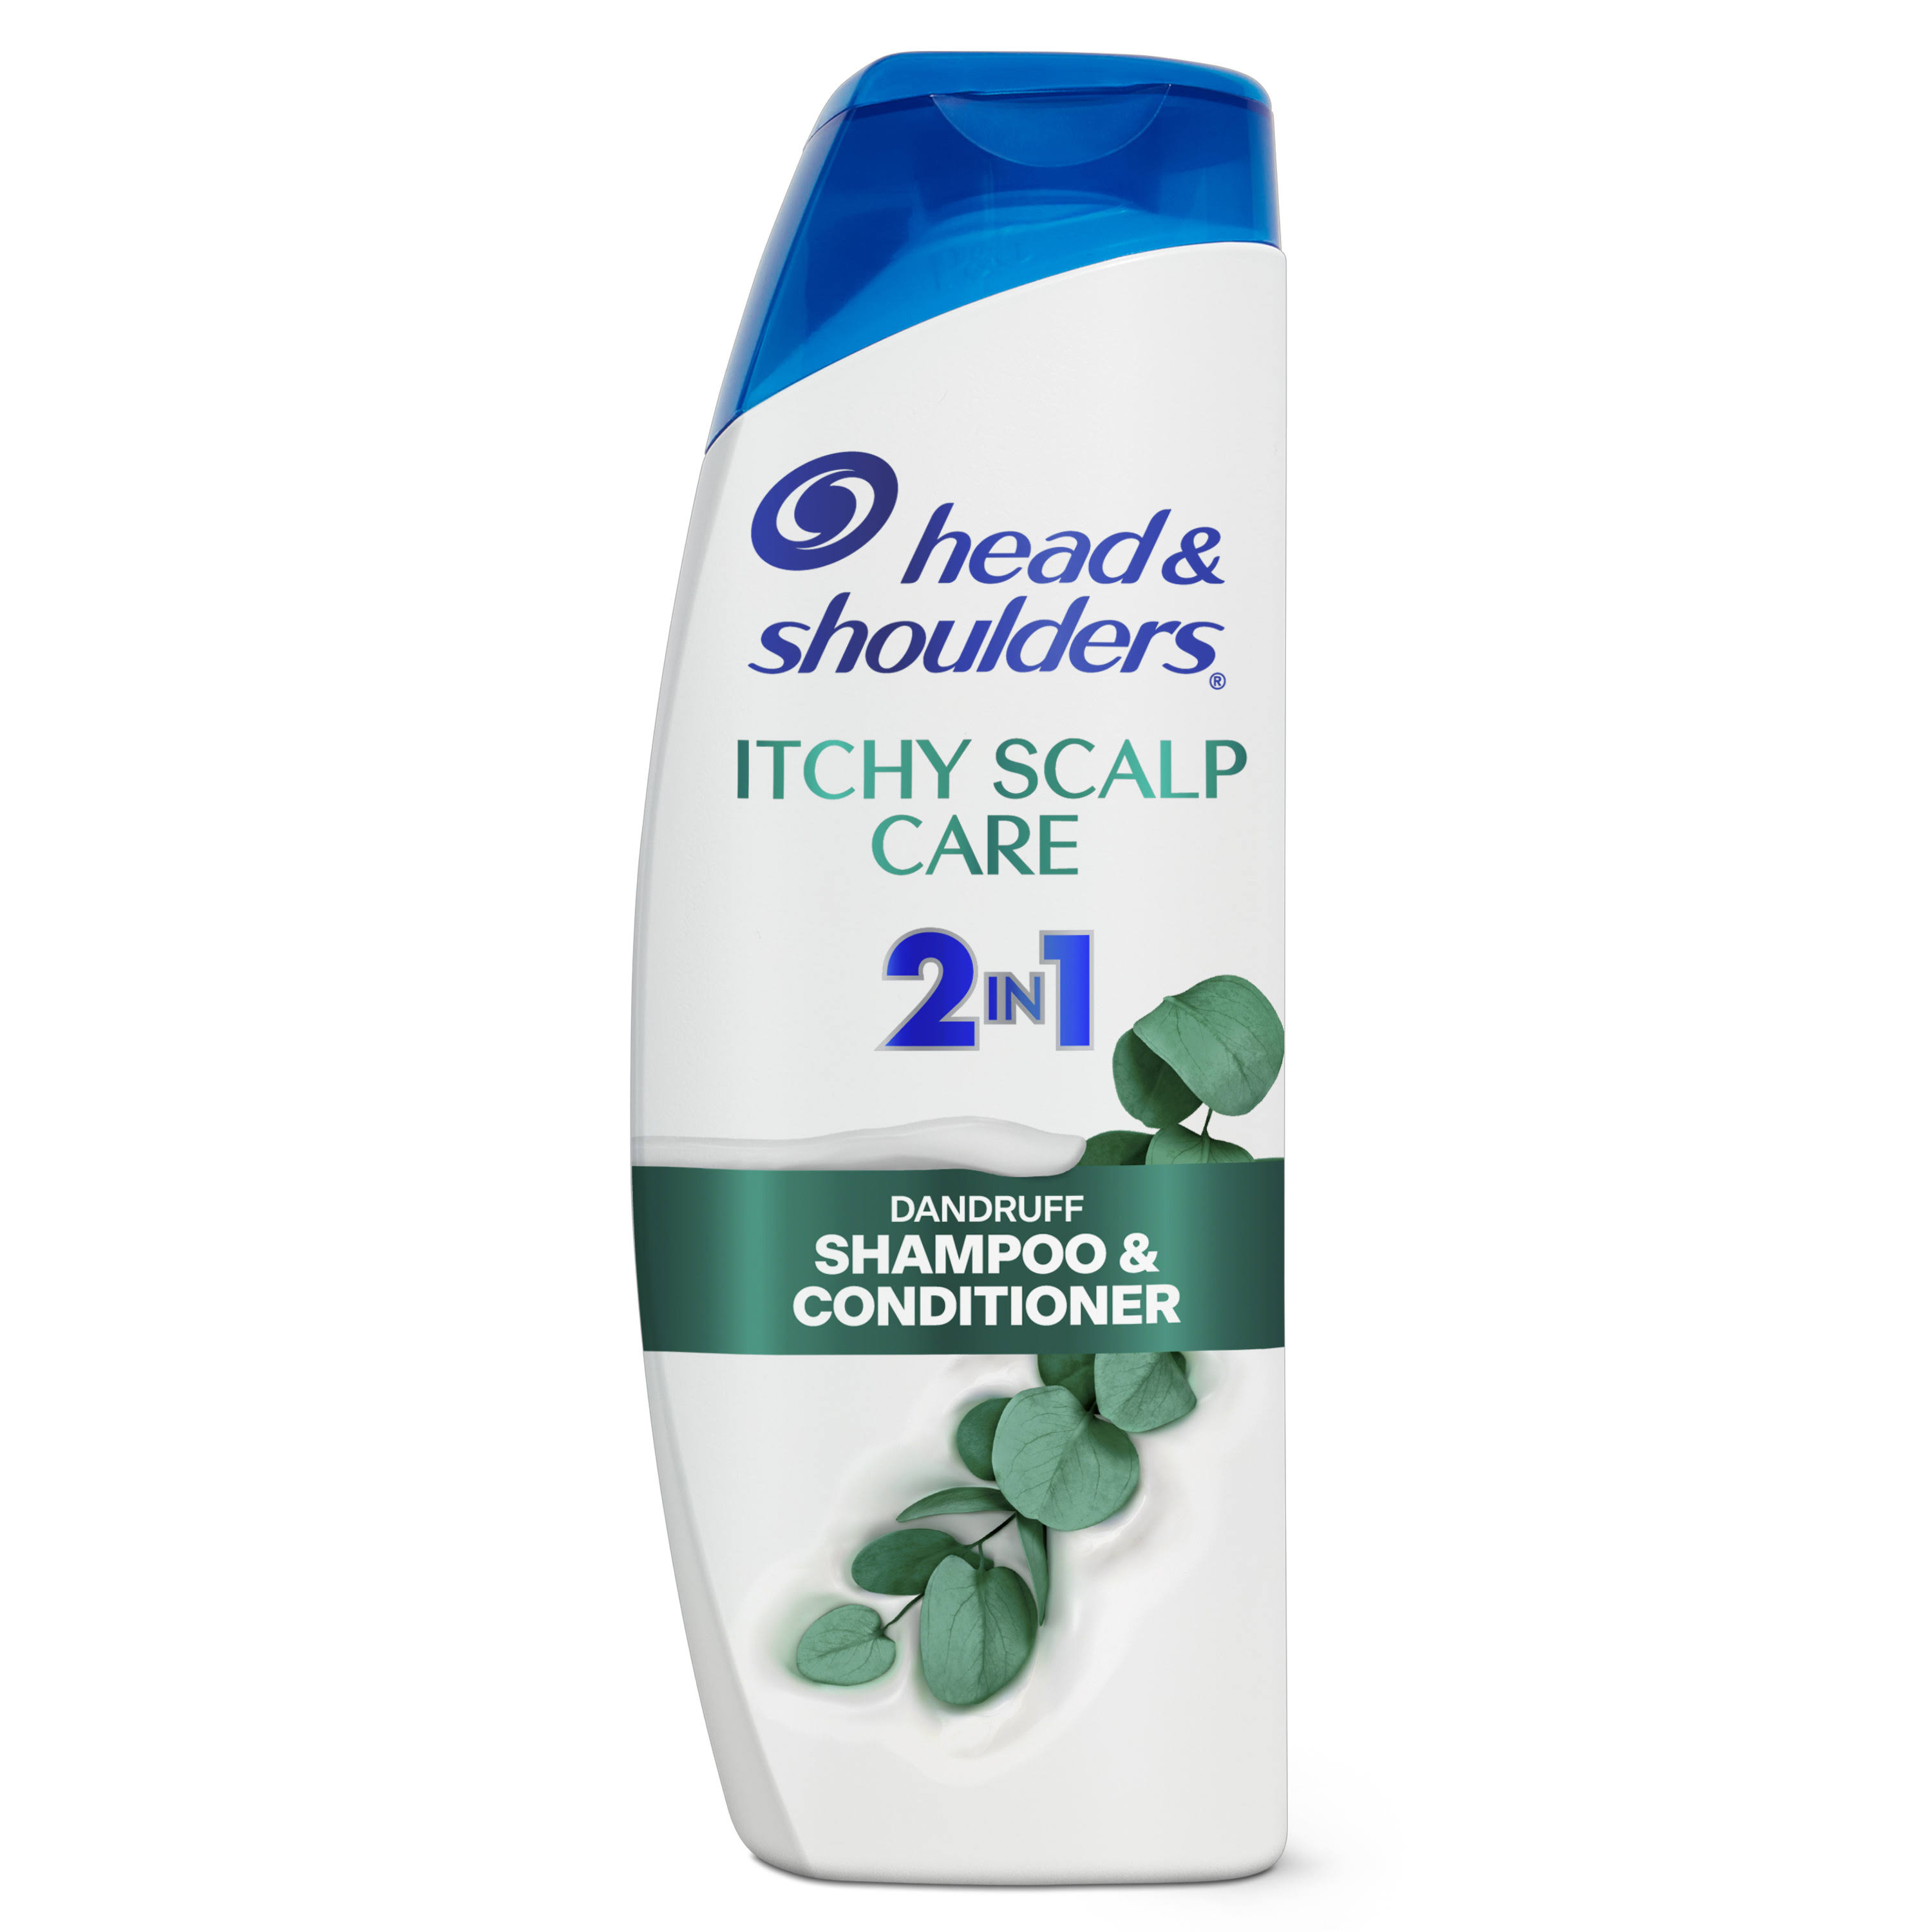 Head & Shoulders 2 in 1 Dandruff Shampoo and Conditioner Itchy Scalp Care - 12.5 fl oz